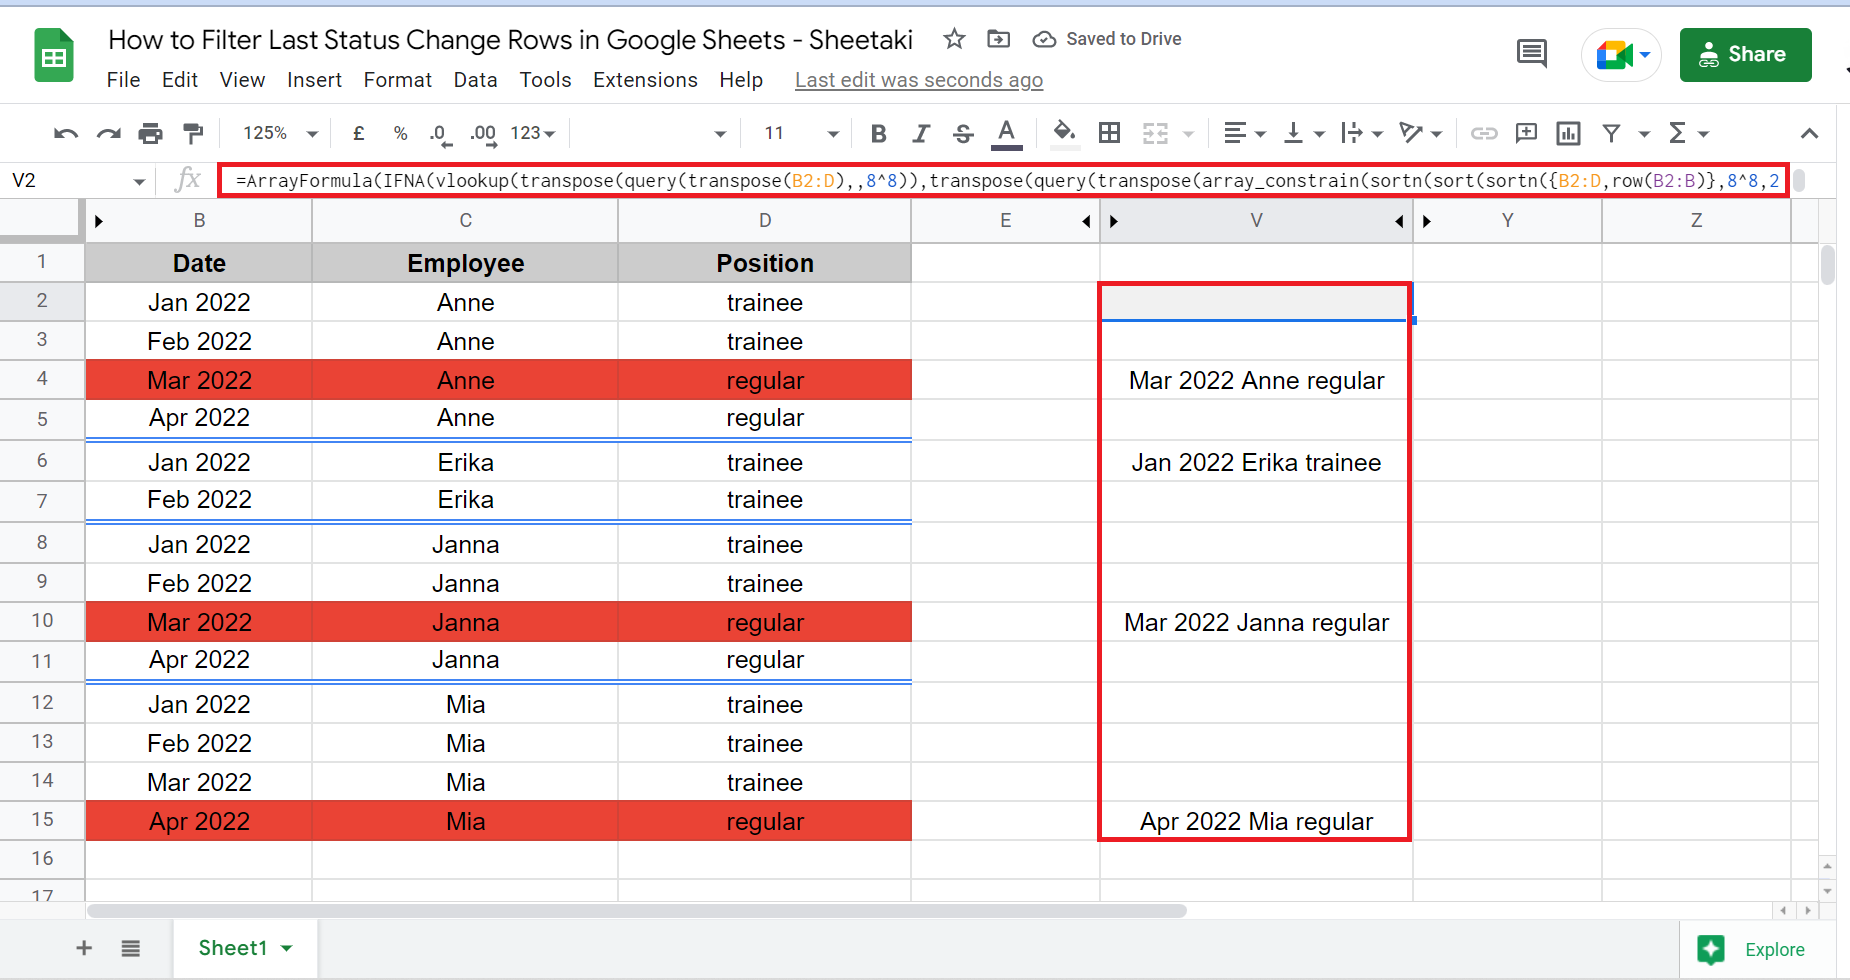 Filter Last Status Change Rows in Google Sheets